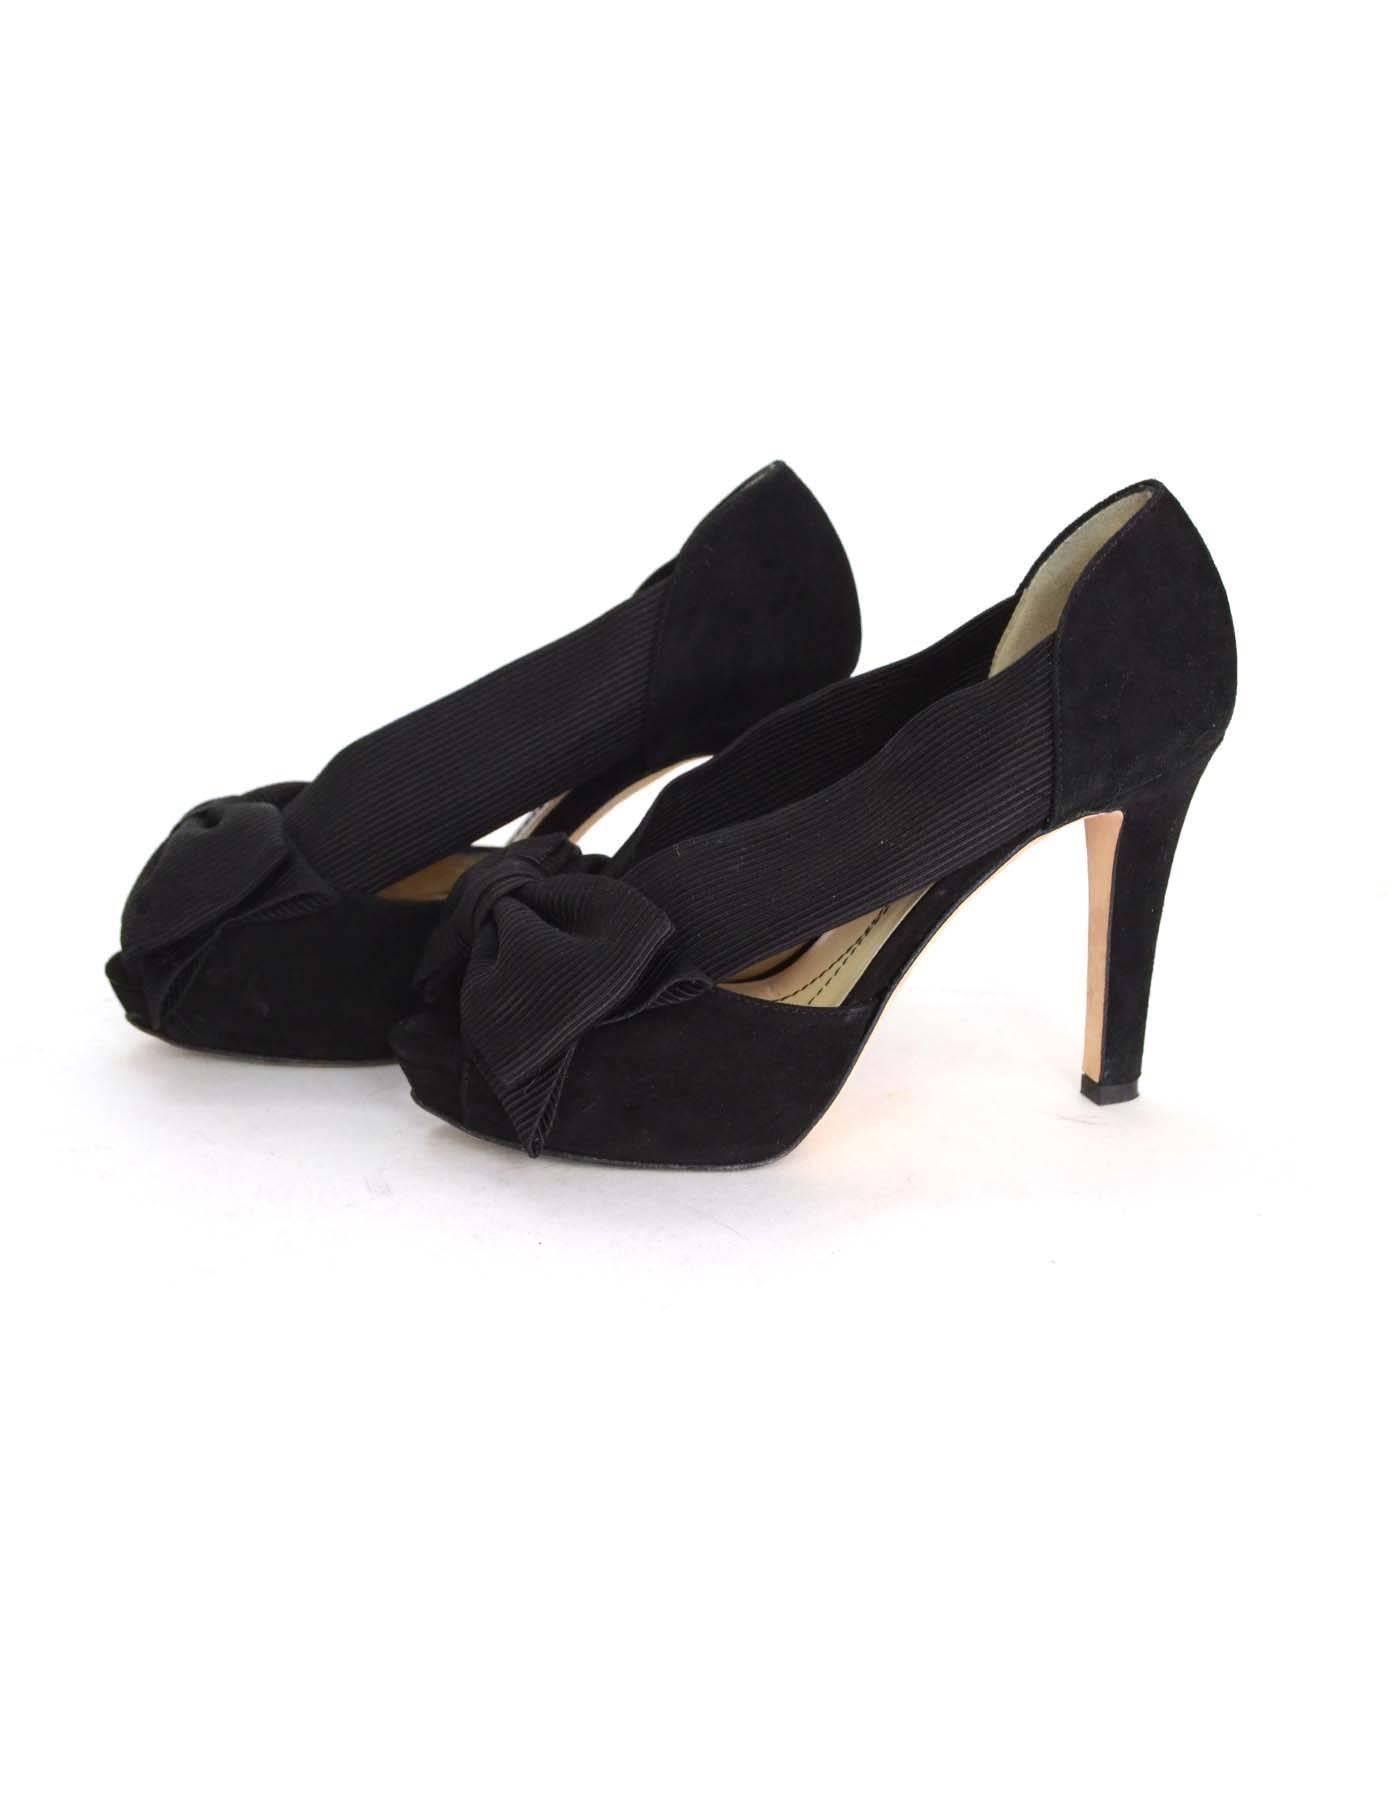 Kate Spade Black Open Toe Bow Pumps Sz 6

Features bow detail at toes

Made In: Italy
Color: Black
Materials: Suede
Closure/Opening: Slide on
Sole Stamp: Kate Spade New York 6 Made in Italy
Overall Condition: Excellent pre-owned condition